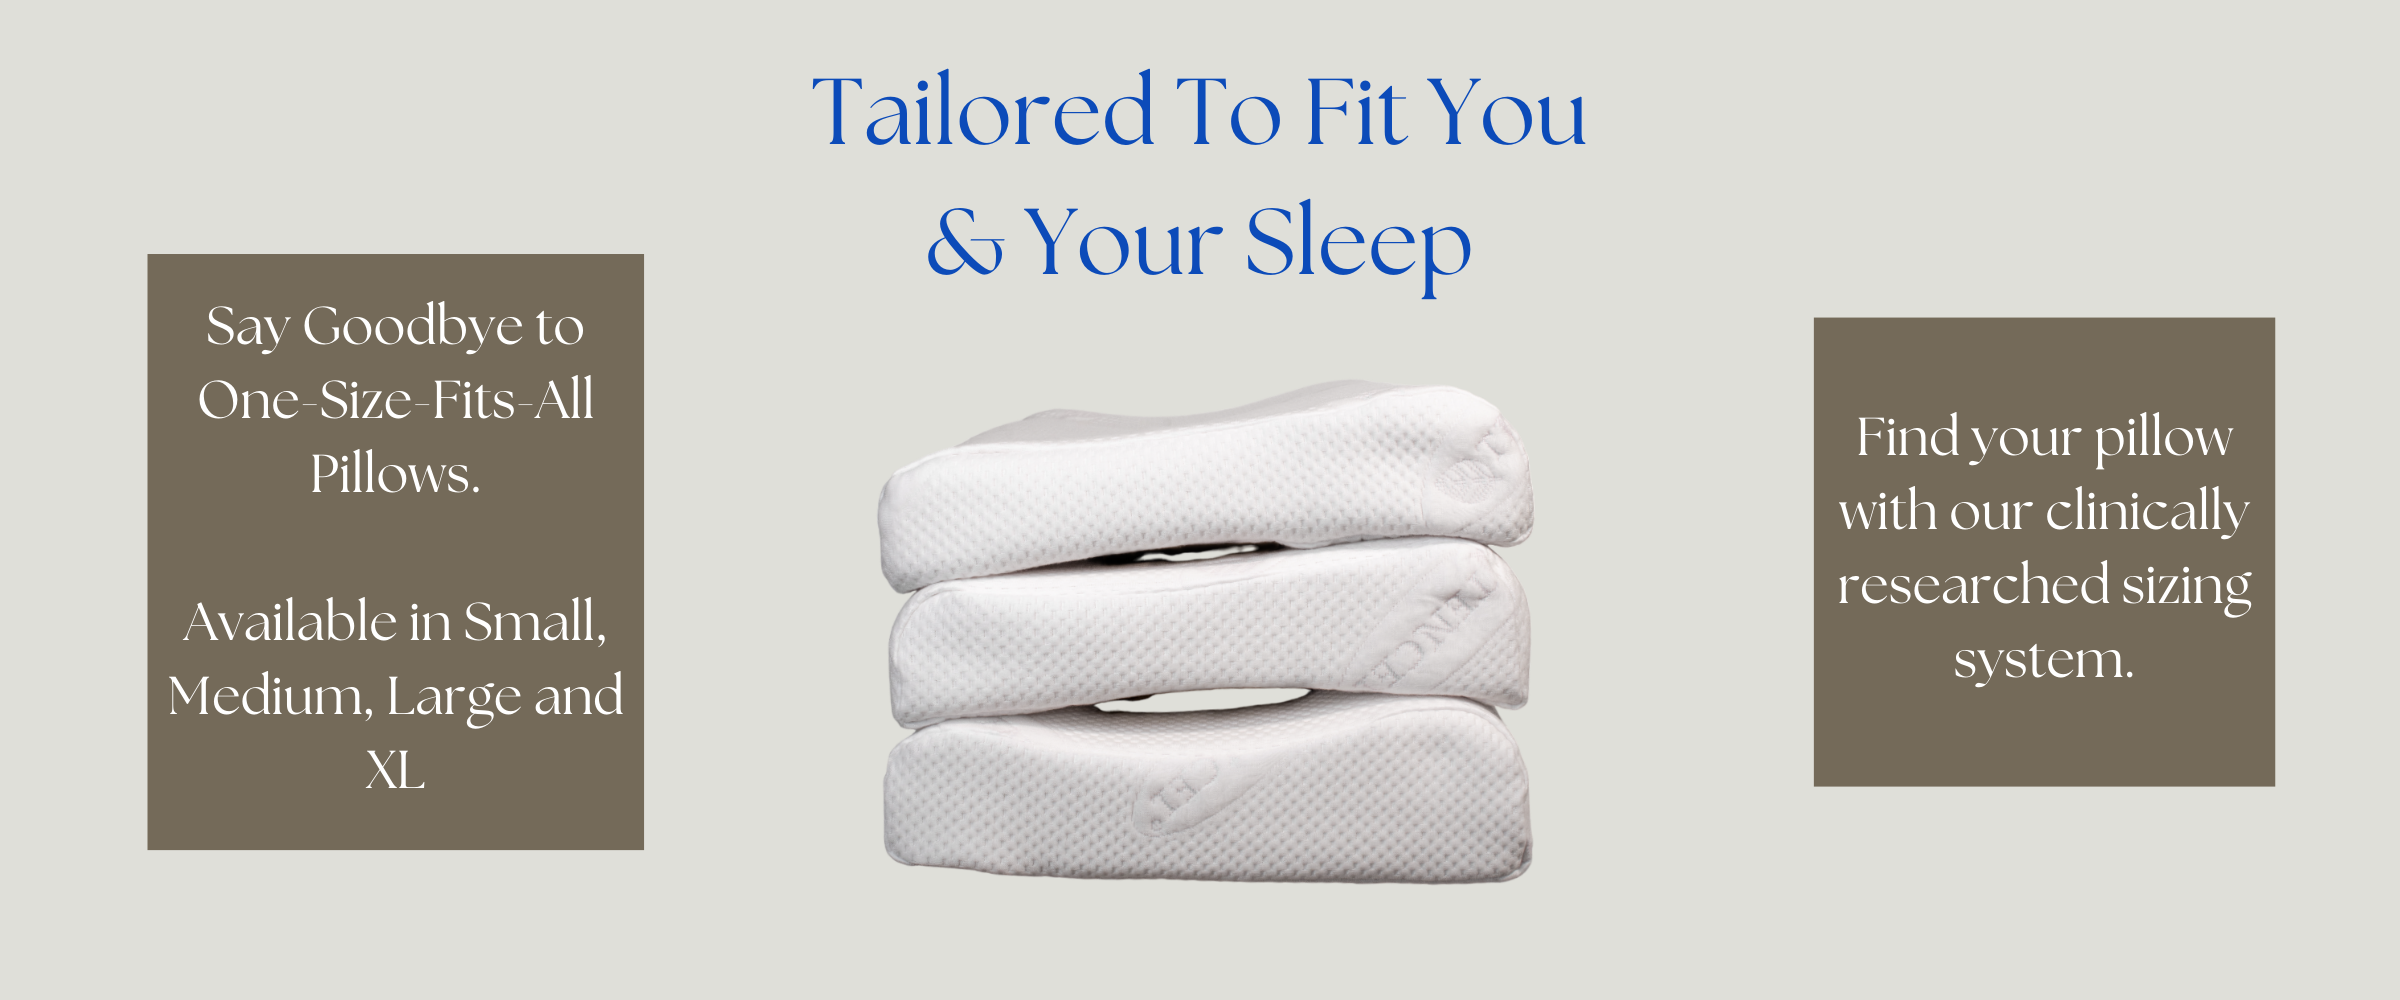 Align Pillow Tailored To Fit You And Your Sleep Banner